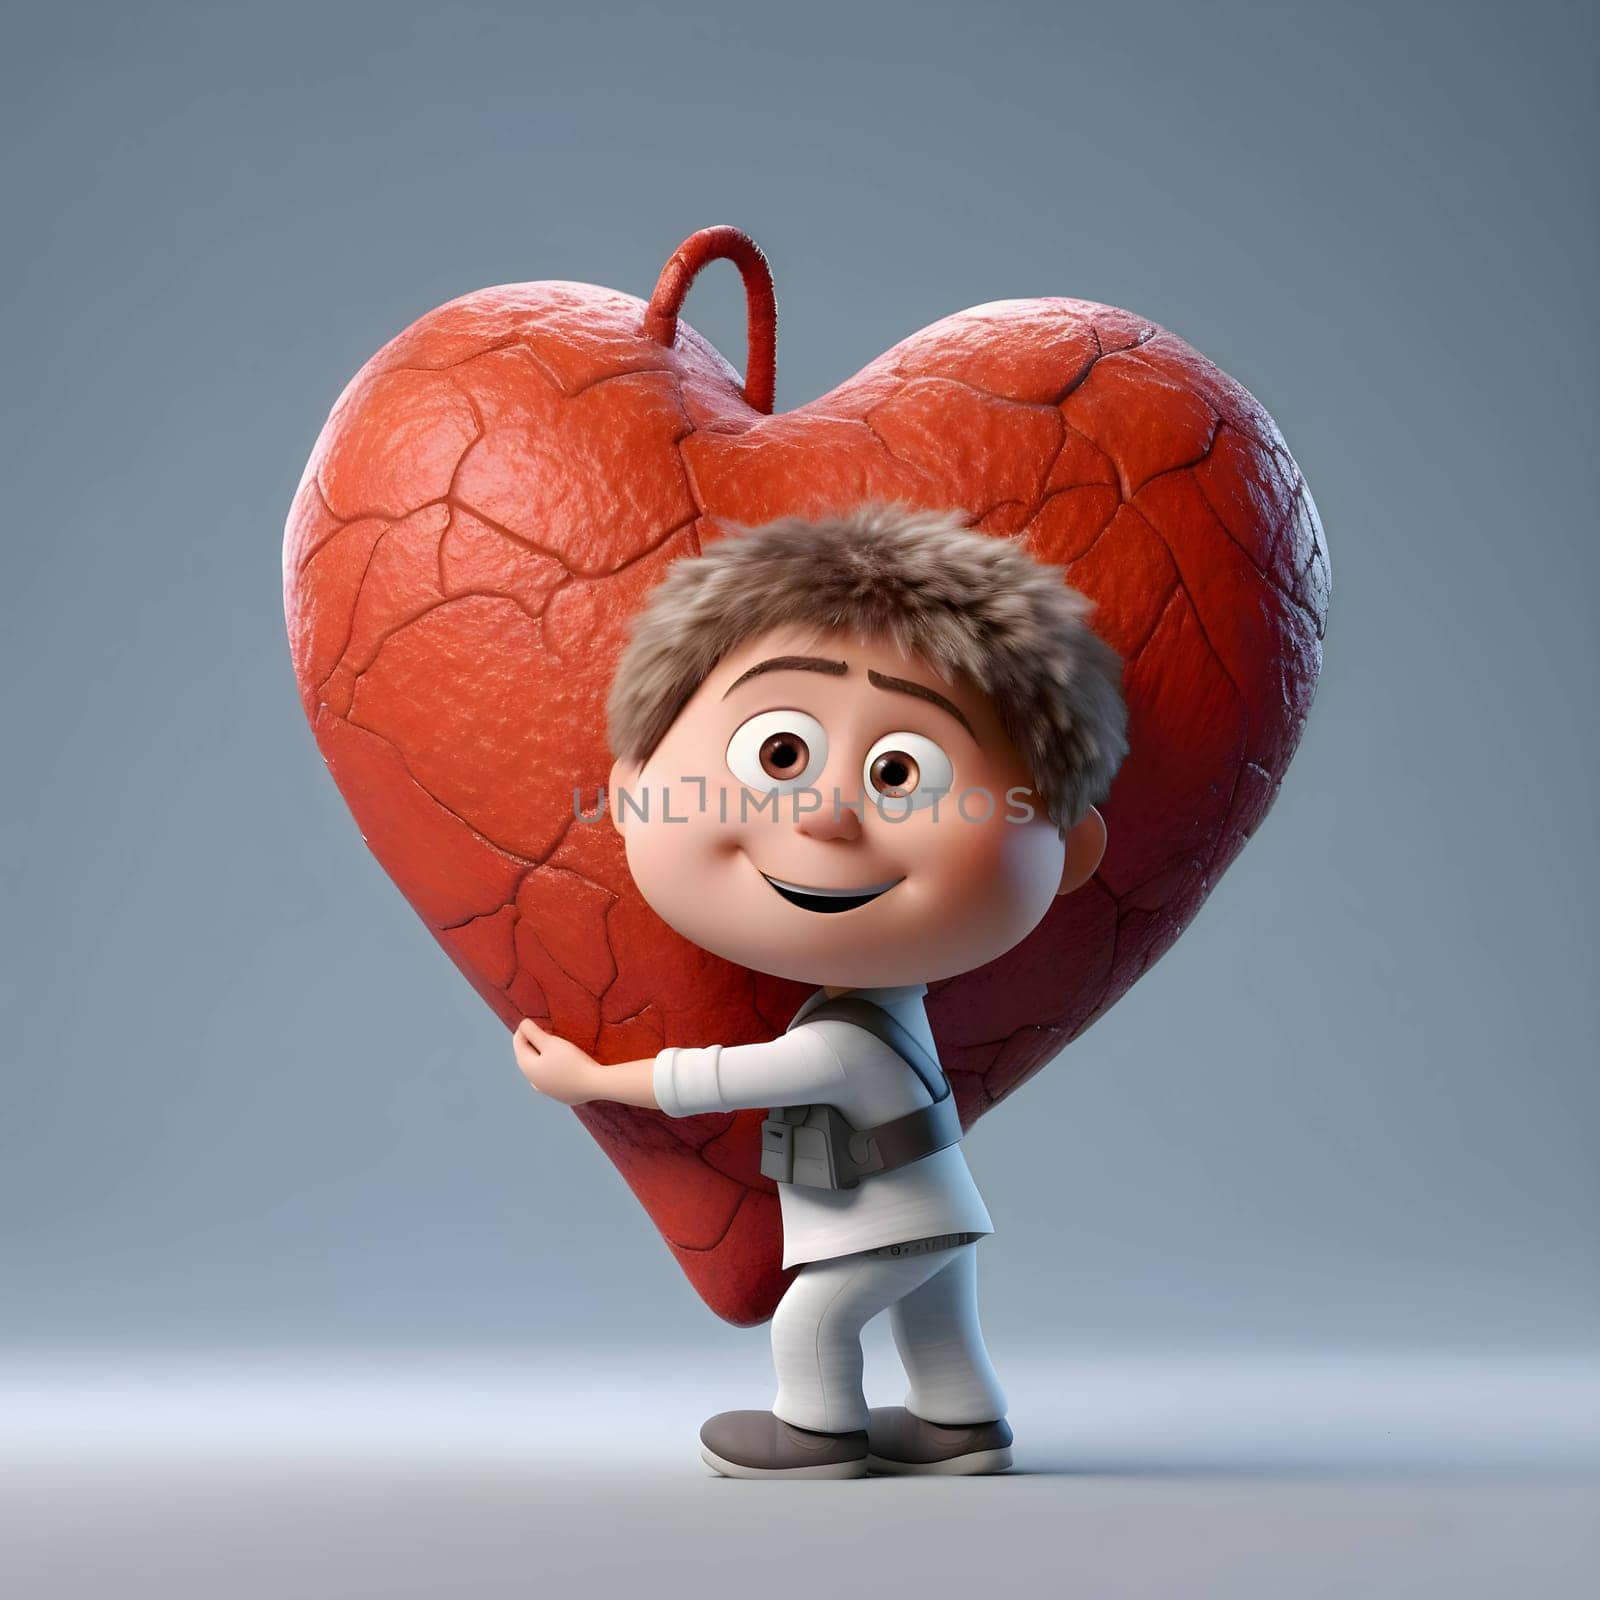 The cartoon boy holds a big red heart in his hands, expressing love and affection.